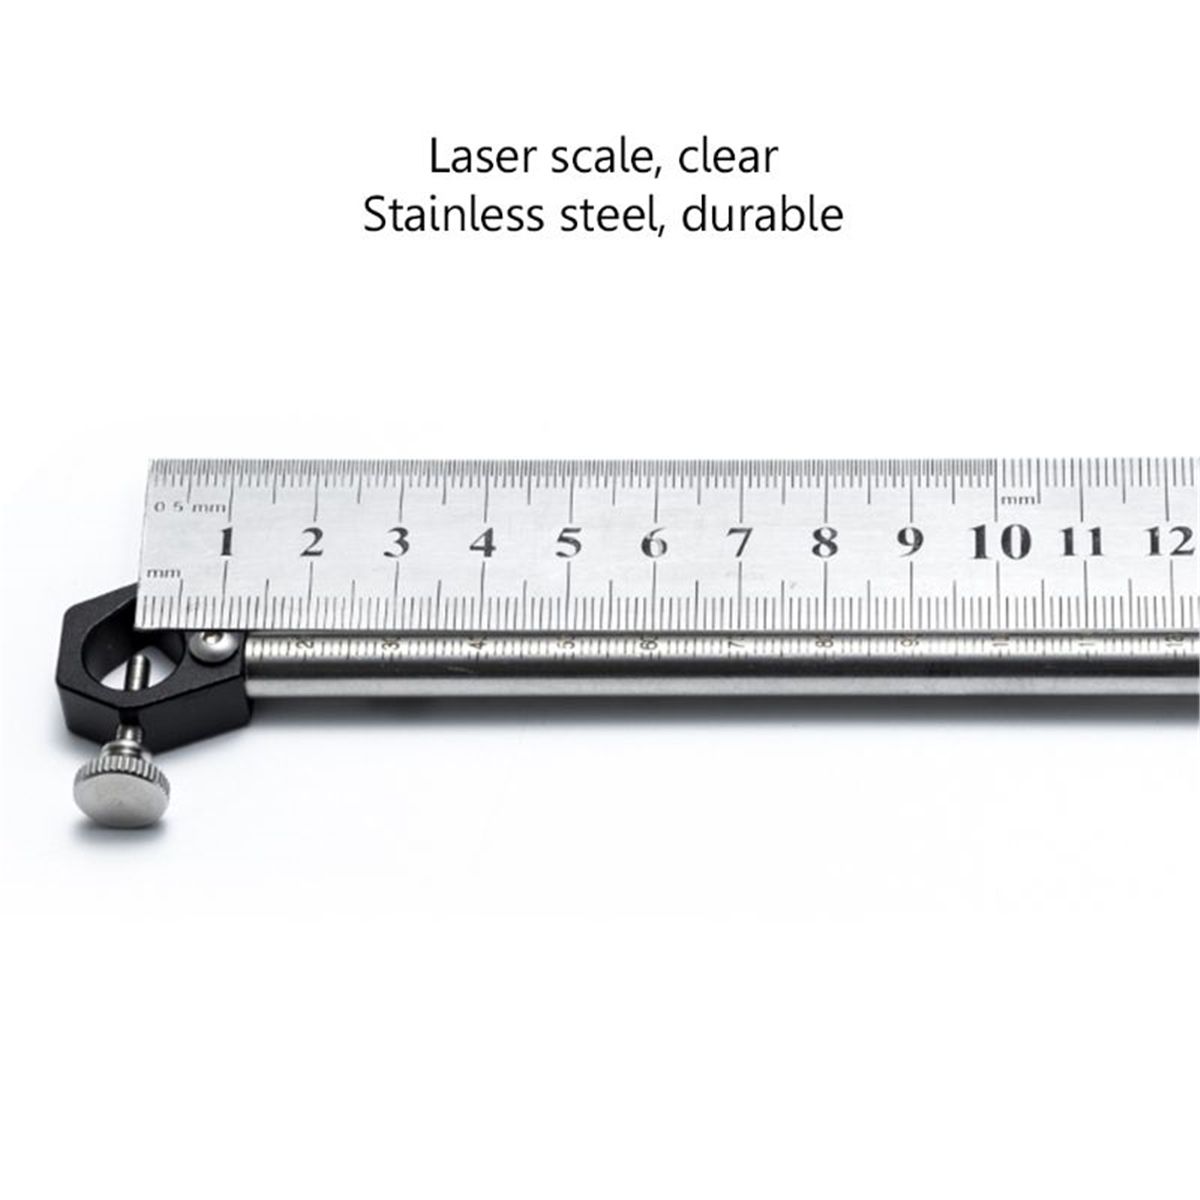 Aluminum-Alloy-Stainless-Steel-Woodworking-Linear-Arc-Dual-purpose-Scriber-Parallel-Line-Drawing-DIY-1474488